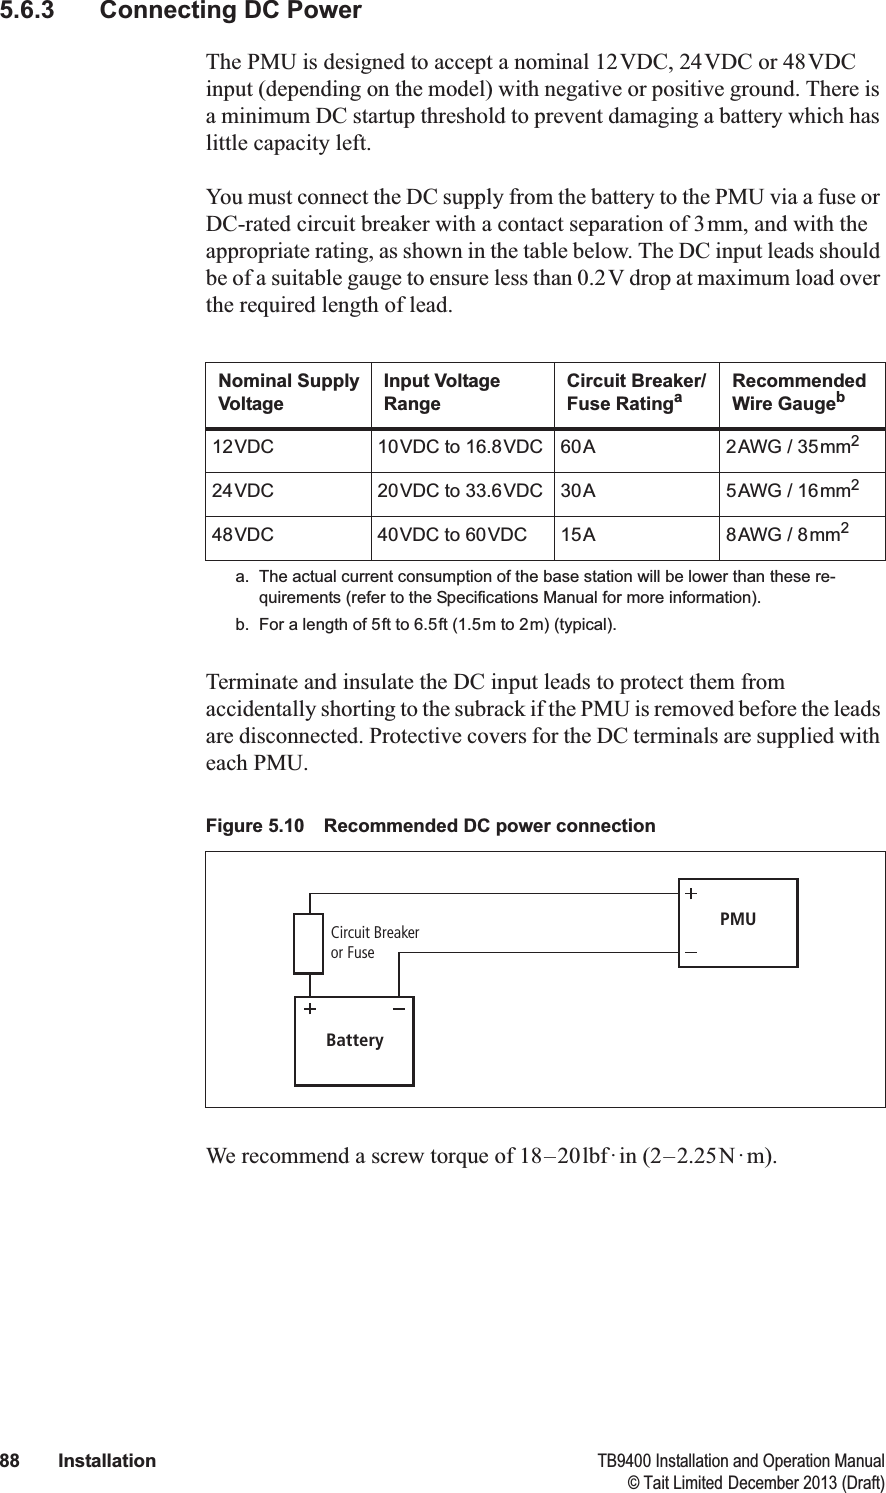  88 Installation TB9400 Installation and Operation Manual© Tait Limited December 2013 (Draft)5.6.3 Connecting DC PowerThe PMU is designed to accept a nominal 12VDC, 24VDC or 48VDC input (depending on the model) with negative or positive ground. There is a minimum DC startup threshold to prevent damaging a battery which has little capacity left.You must connect the DC supply from the battery to the PMU via a fuse or DC-rated circuit breaker with a contact separation of 3mm, and with the appropriate rating, as shown in the table below. The DC input leads should be of a suitable gauge to ensure less than 0.2V drop at maximum load over the required length of lead.Terminate and insulate the DC input leads to protect them from accidentally shorting to the subrack if the PMU is removed before the leads are disconnected. Protective covers for the DC terminals are supplied with each PMU.We recommend a screw torque of 18–20lbf·in (2–2.25N·m). Nominal Supply VoltageInput Voltage RangeCircuit Breaker/Fuse Ratingaa. The actual current consumption of the base station will be lower than these re-quirements (refer to the Specifications Manual for more information).Recommended Wire Gaugebb. For a length of 5ft to 6.5ft (1.5m to 2m) (typical).12VDC 10VDC to 16.8VDC 60A 2AWG / 35mm224VDC 20VDC to 33.6VDC 30A 5AWG / 16mm248VDC 40VDC to 60VDC 15A 8AWG / 8mm2Figure 5.10 Recommended DC power connectionBatteryCircuit Breakeror FusePMU